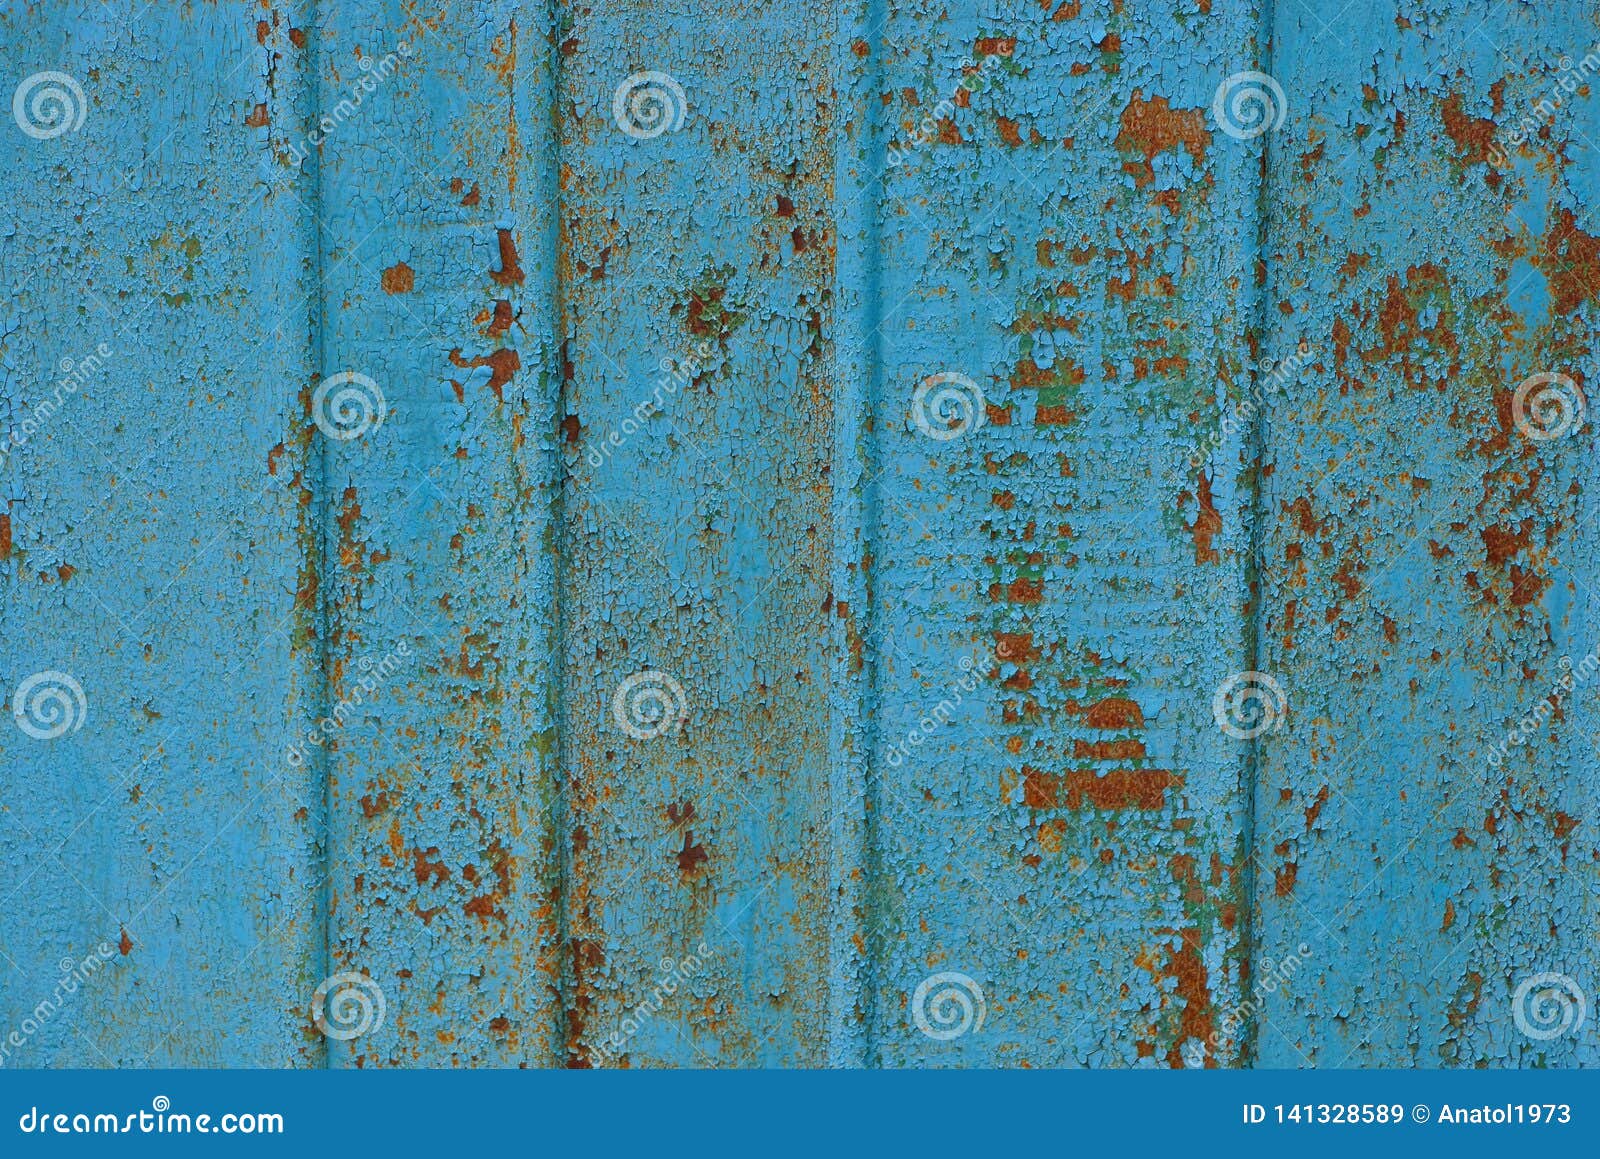 Rust and blue фото 103